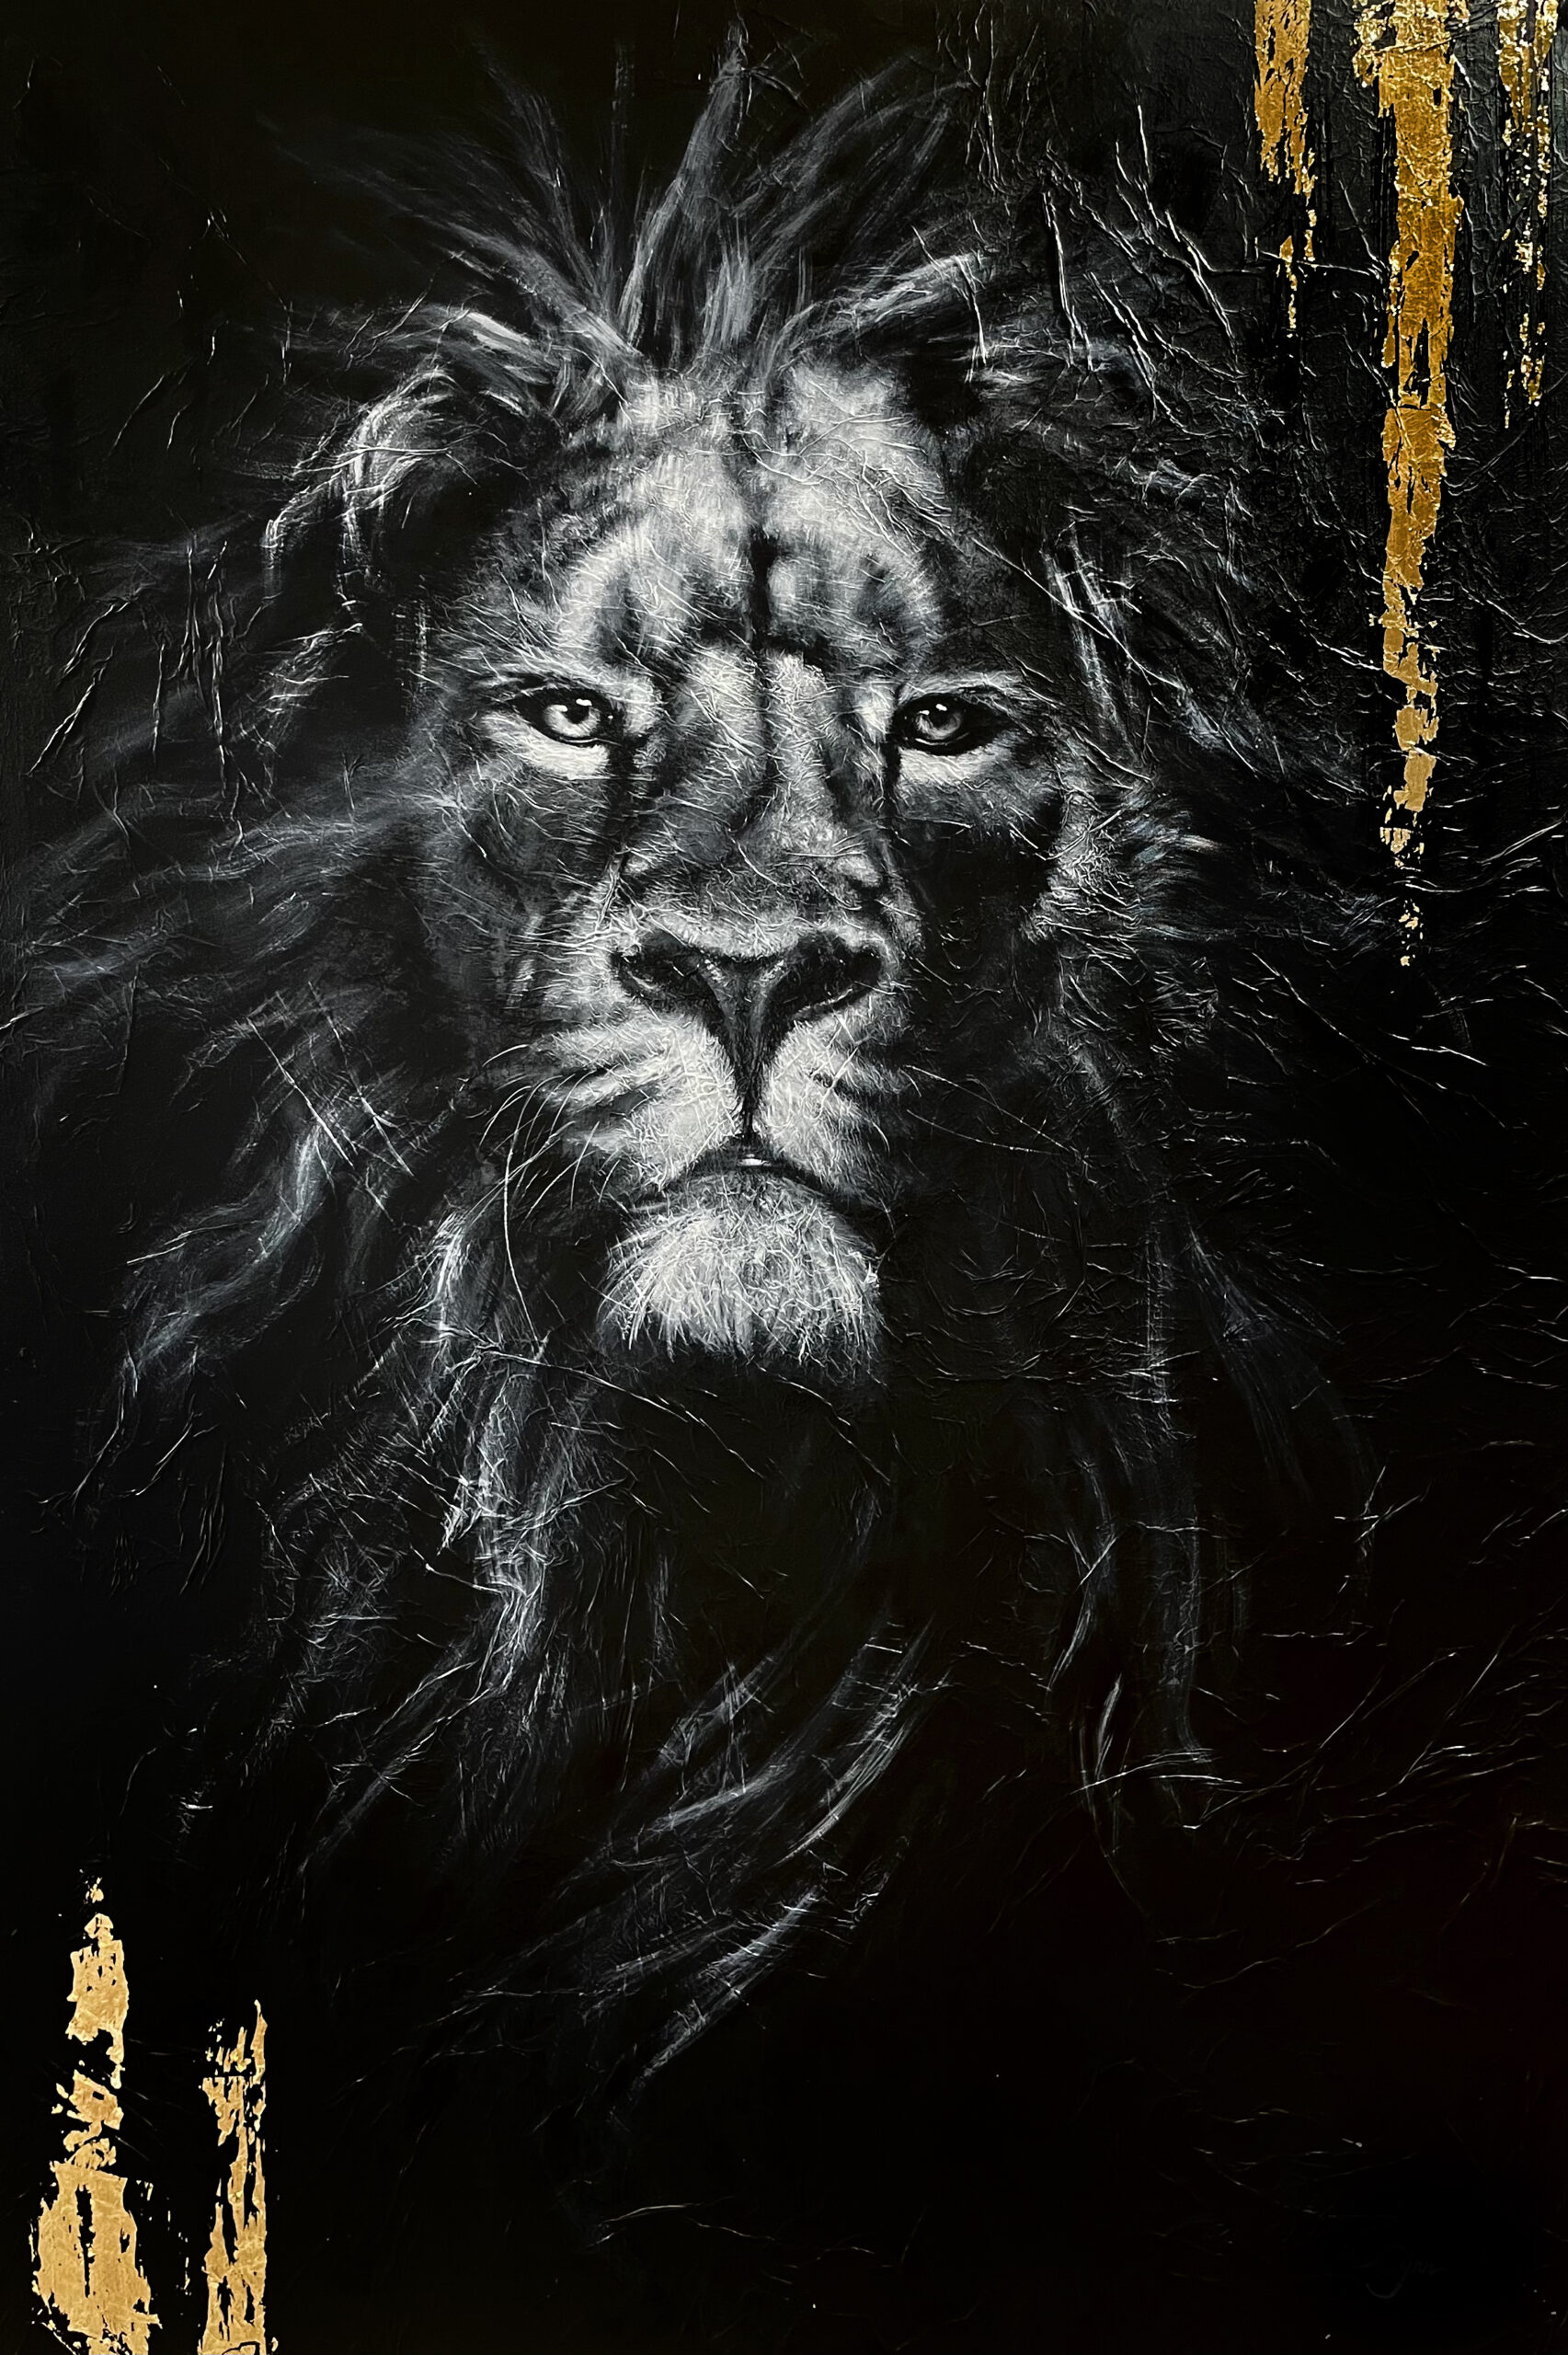 The lion king, 150x100cm, ND